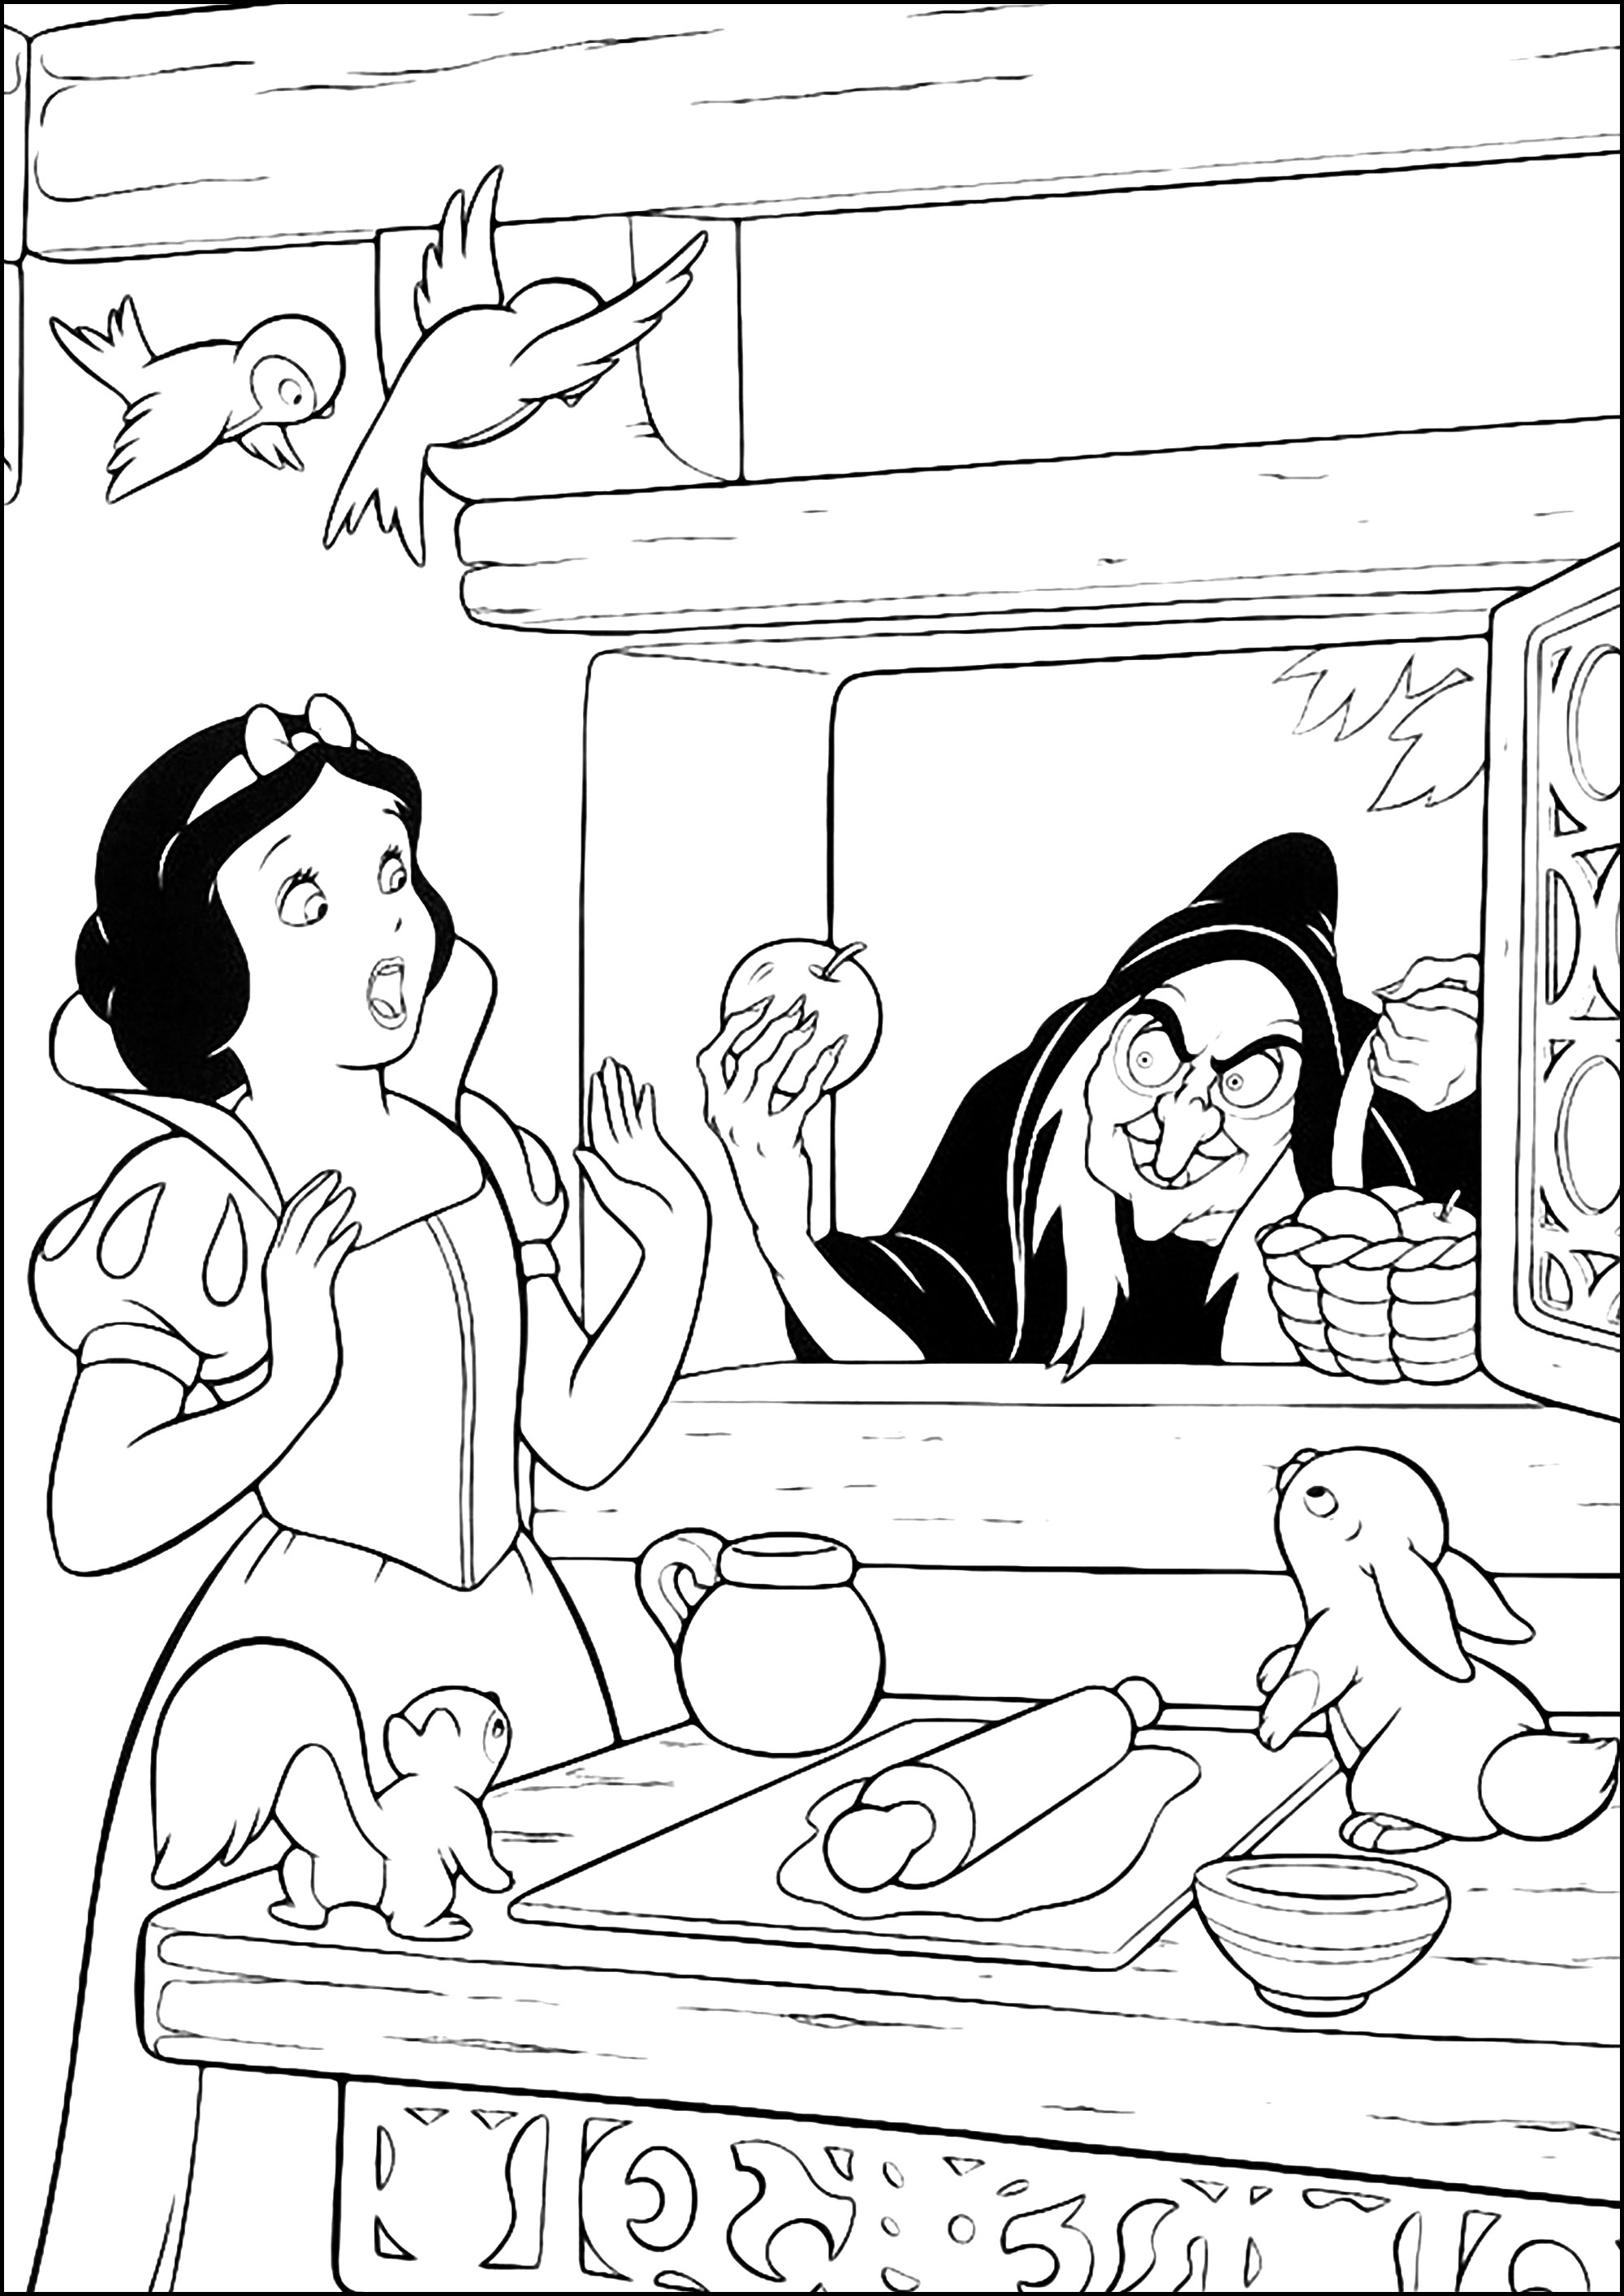 The Evil Queen transformed into a witch to give Snow White a poisoned apple